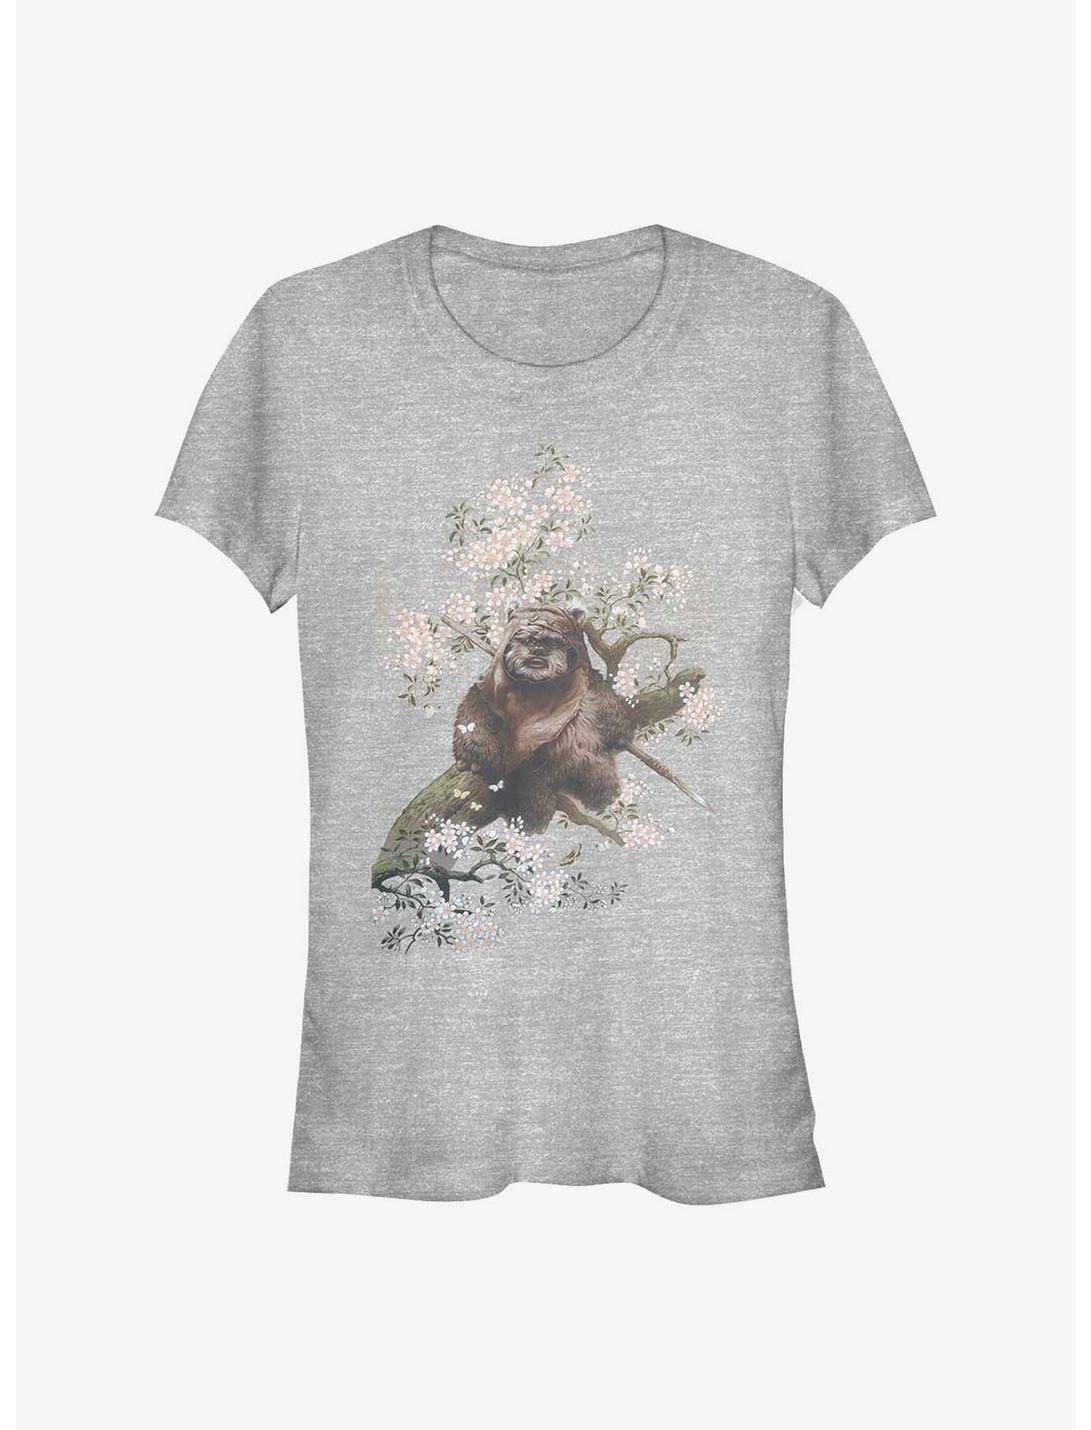 Star Wars Ewok In The Flowers Girls T-Shirt, ATH HTR, hi-res